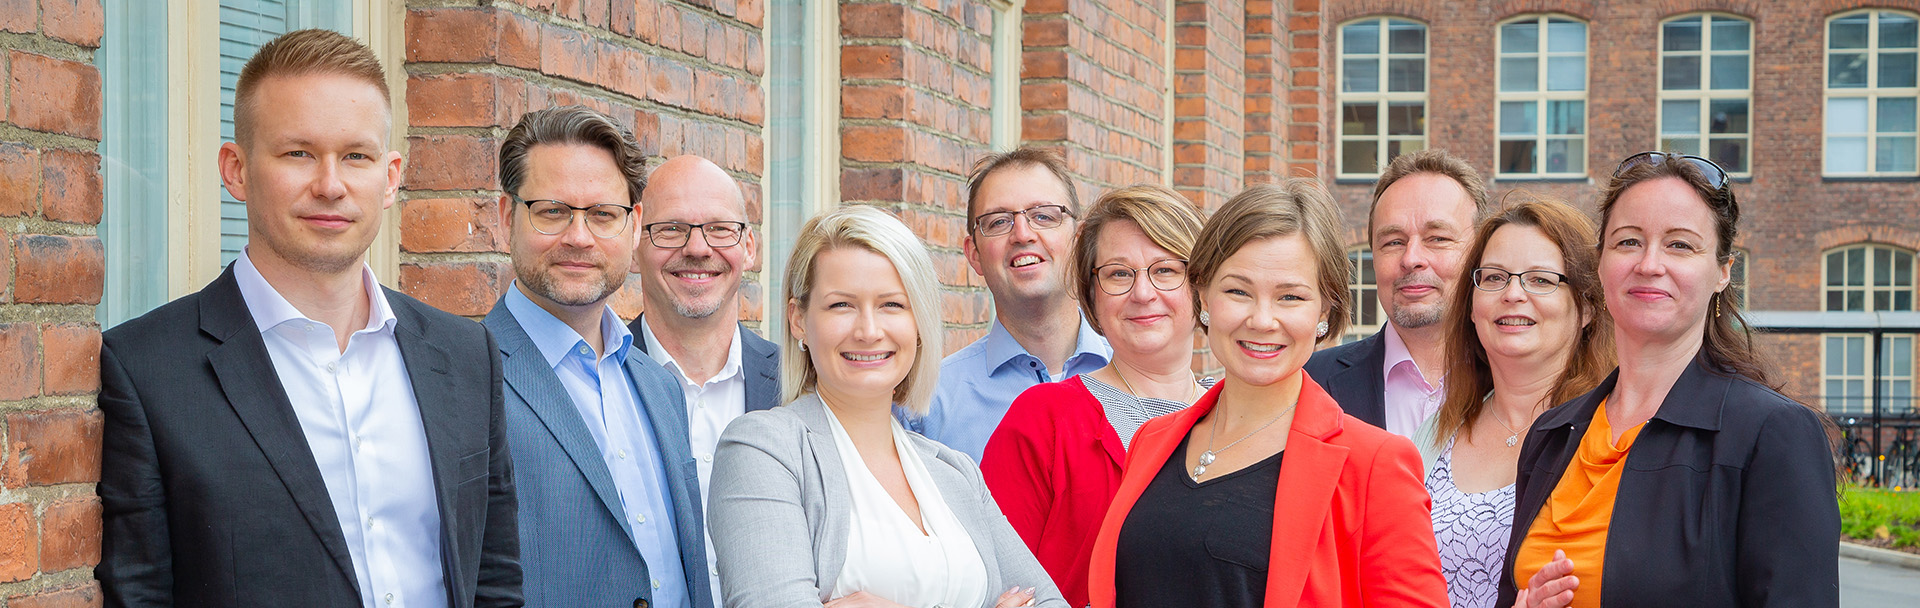 Business Tampere advisors at your service, contact us! Photo: Mirella Mellonmaa